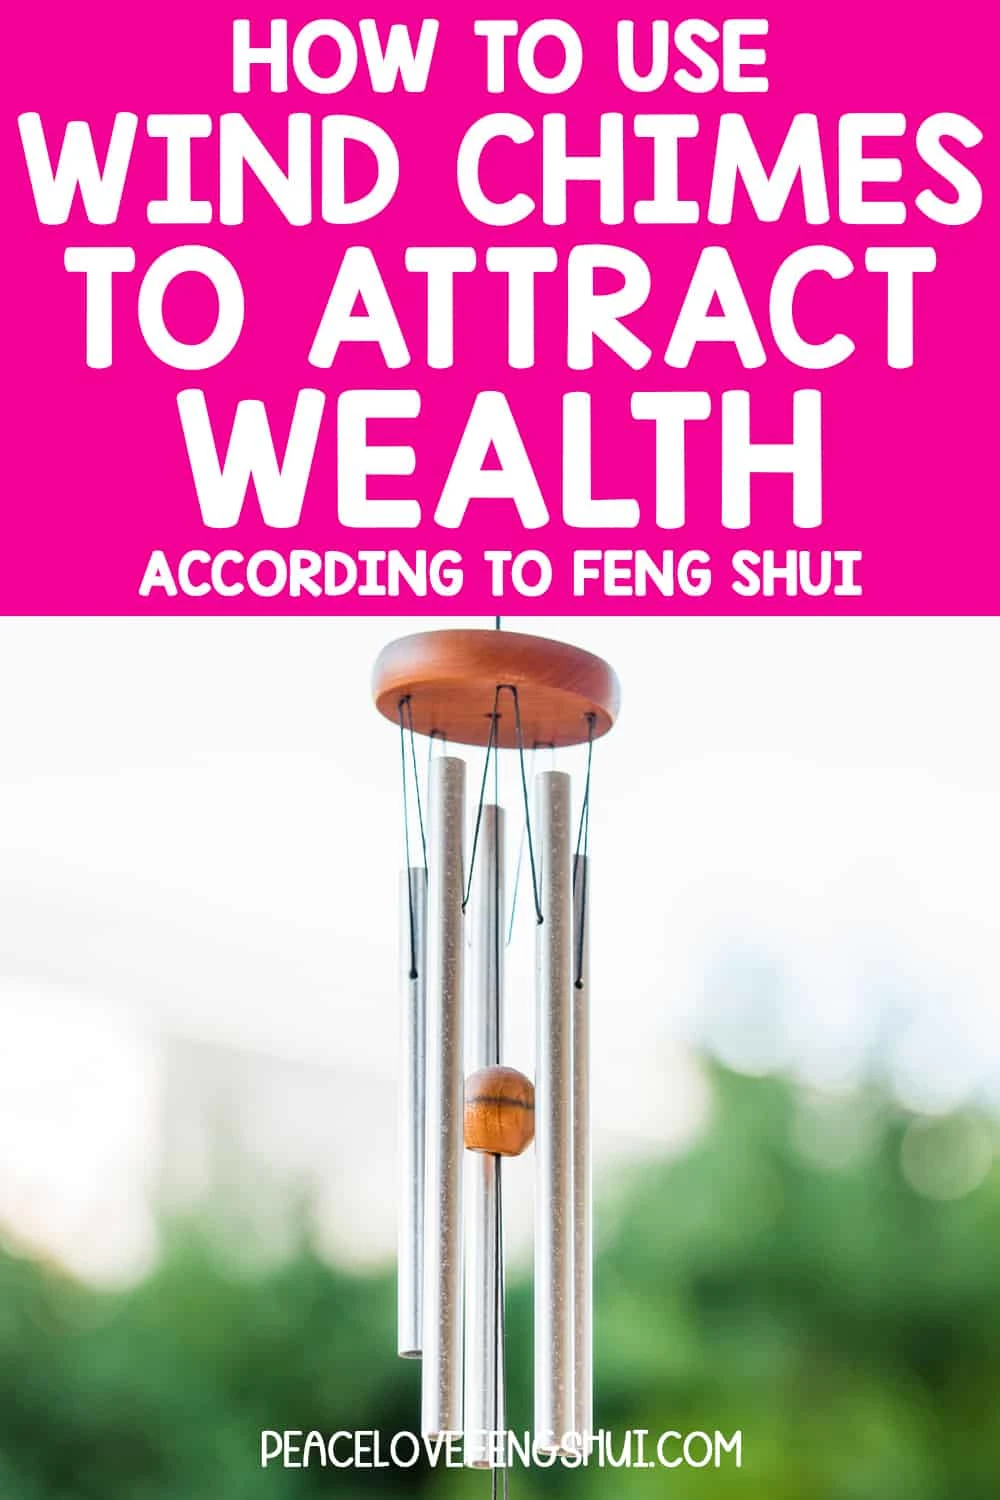 how to use wind chimes to attract wealth according to feng shui